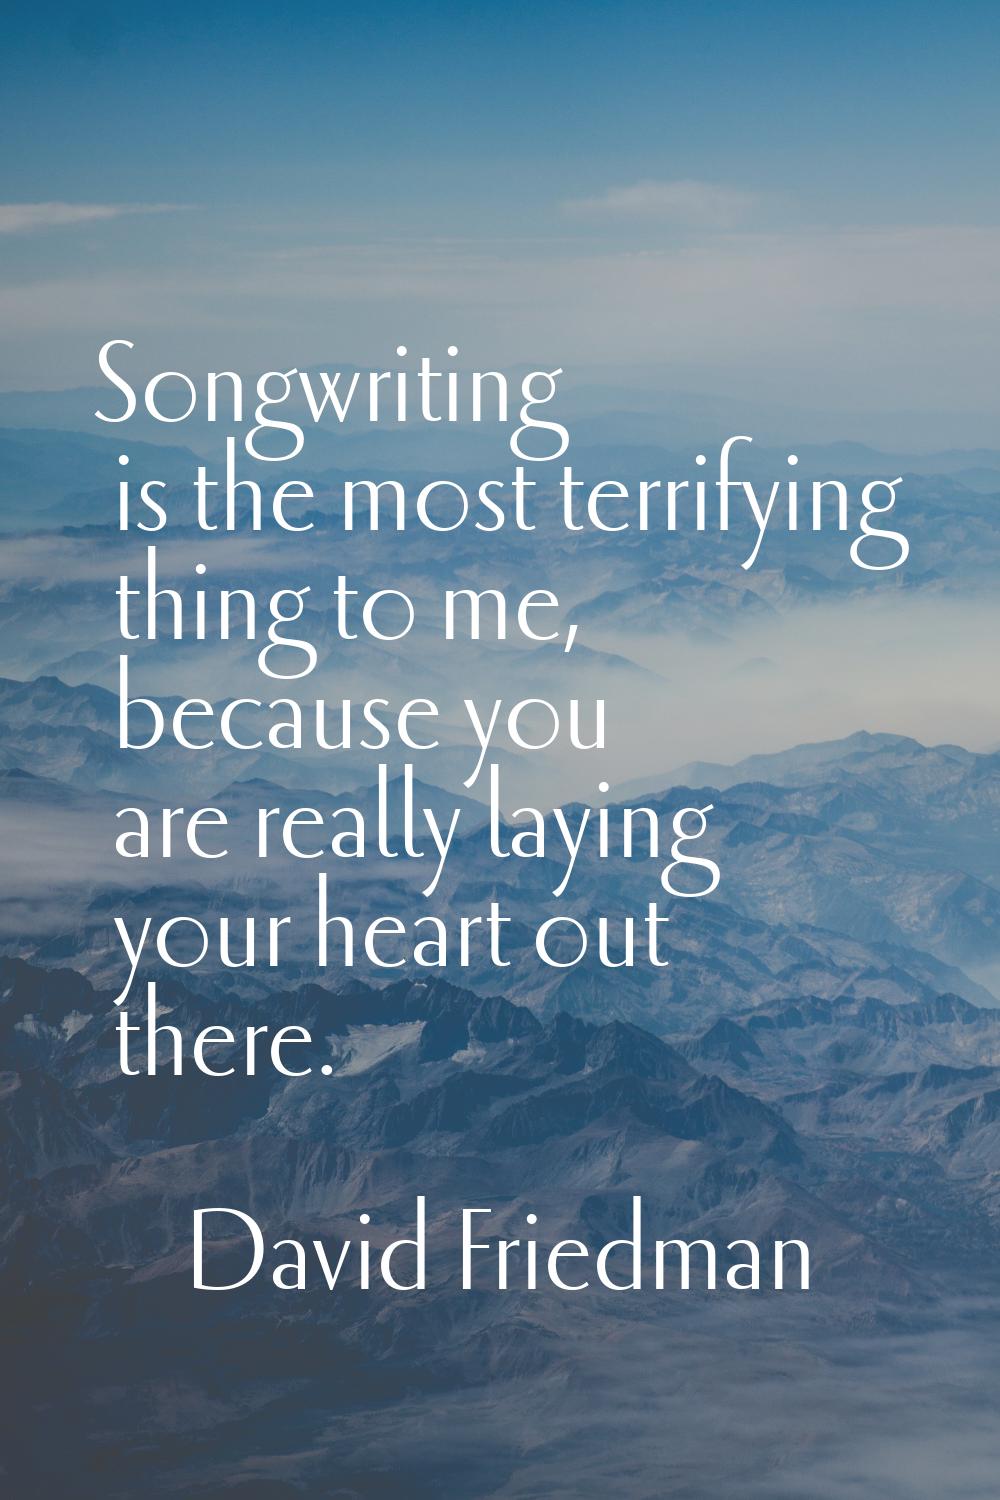 Songwriting is the most terrifying thing to me, because you are really laying your heart out there.